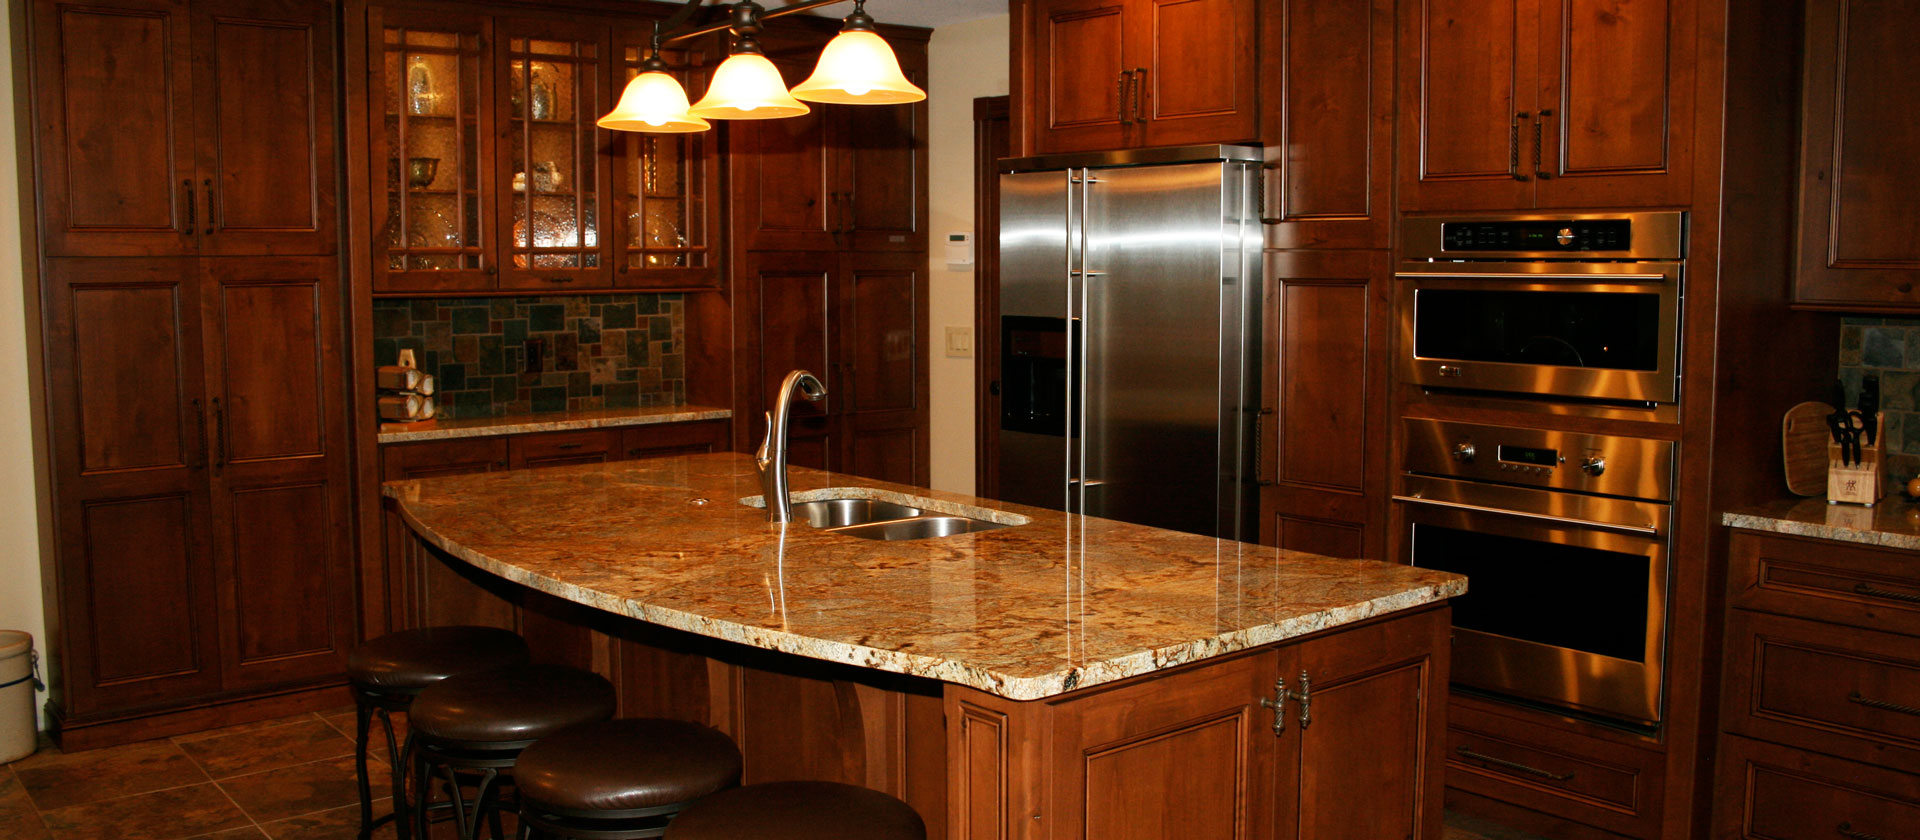 Custom Designed Kitchens And Bathrooms In Columbia Mo